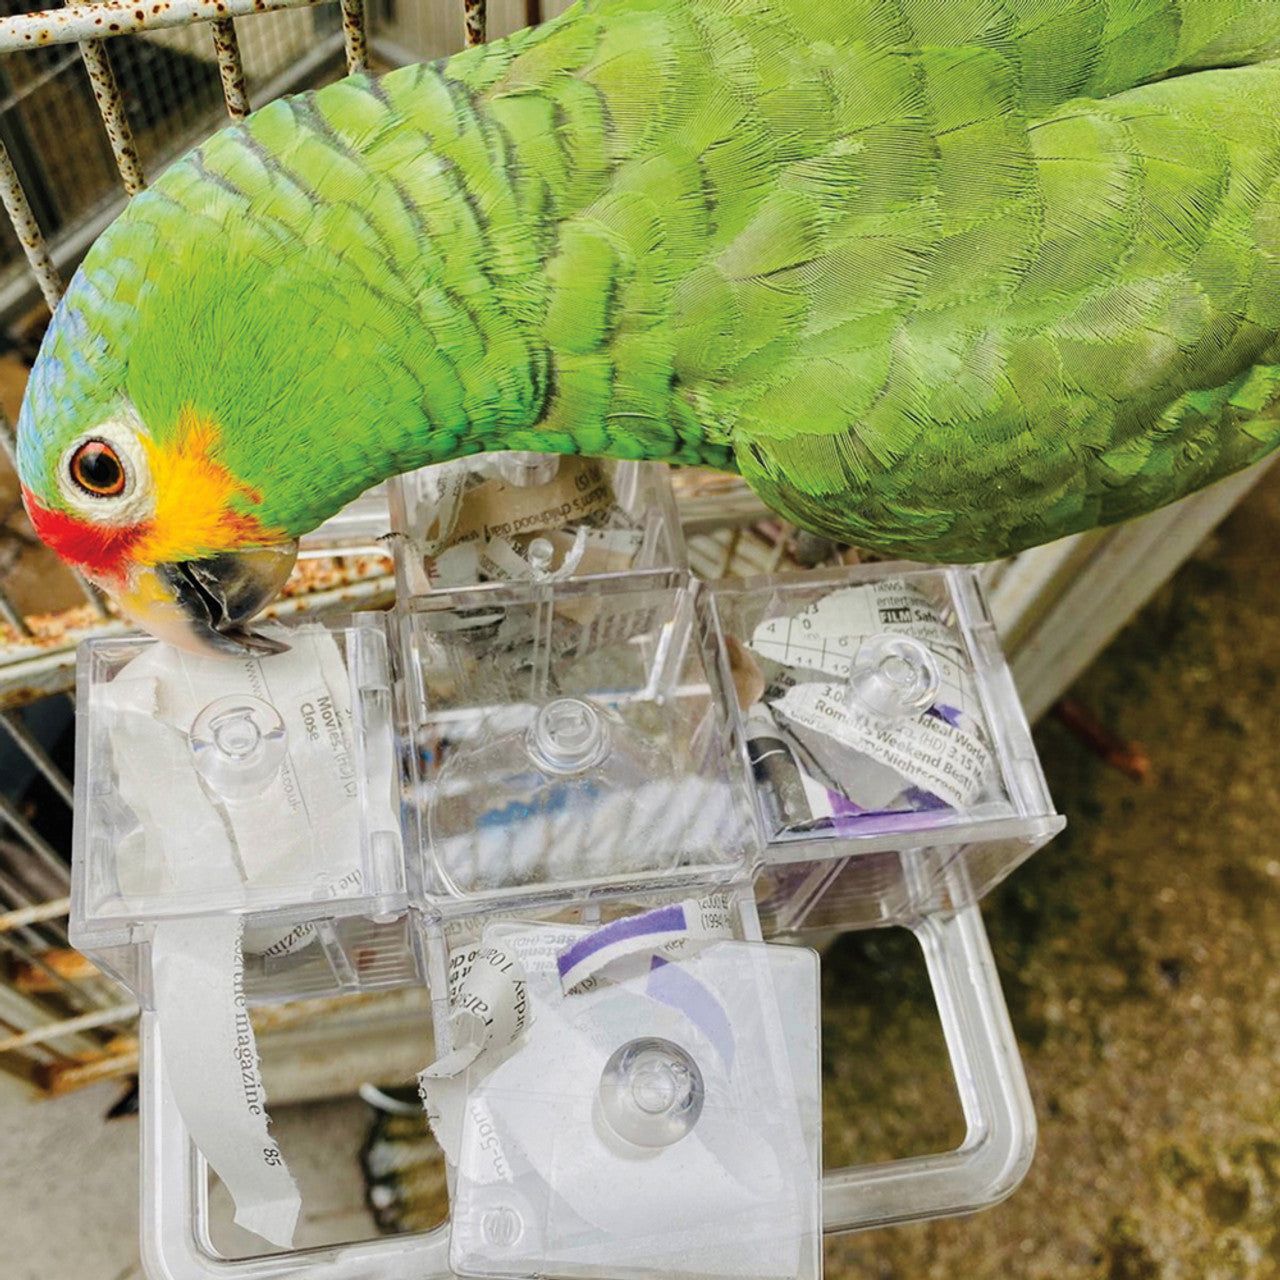 Creative Foraging Carousel - Mentally Stimulating Parrot Toy